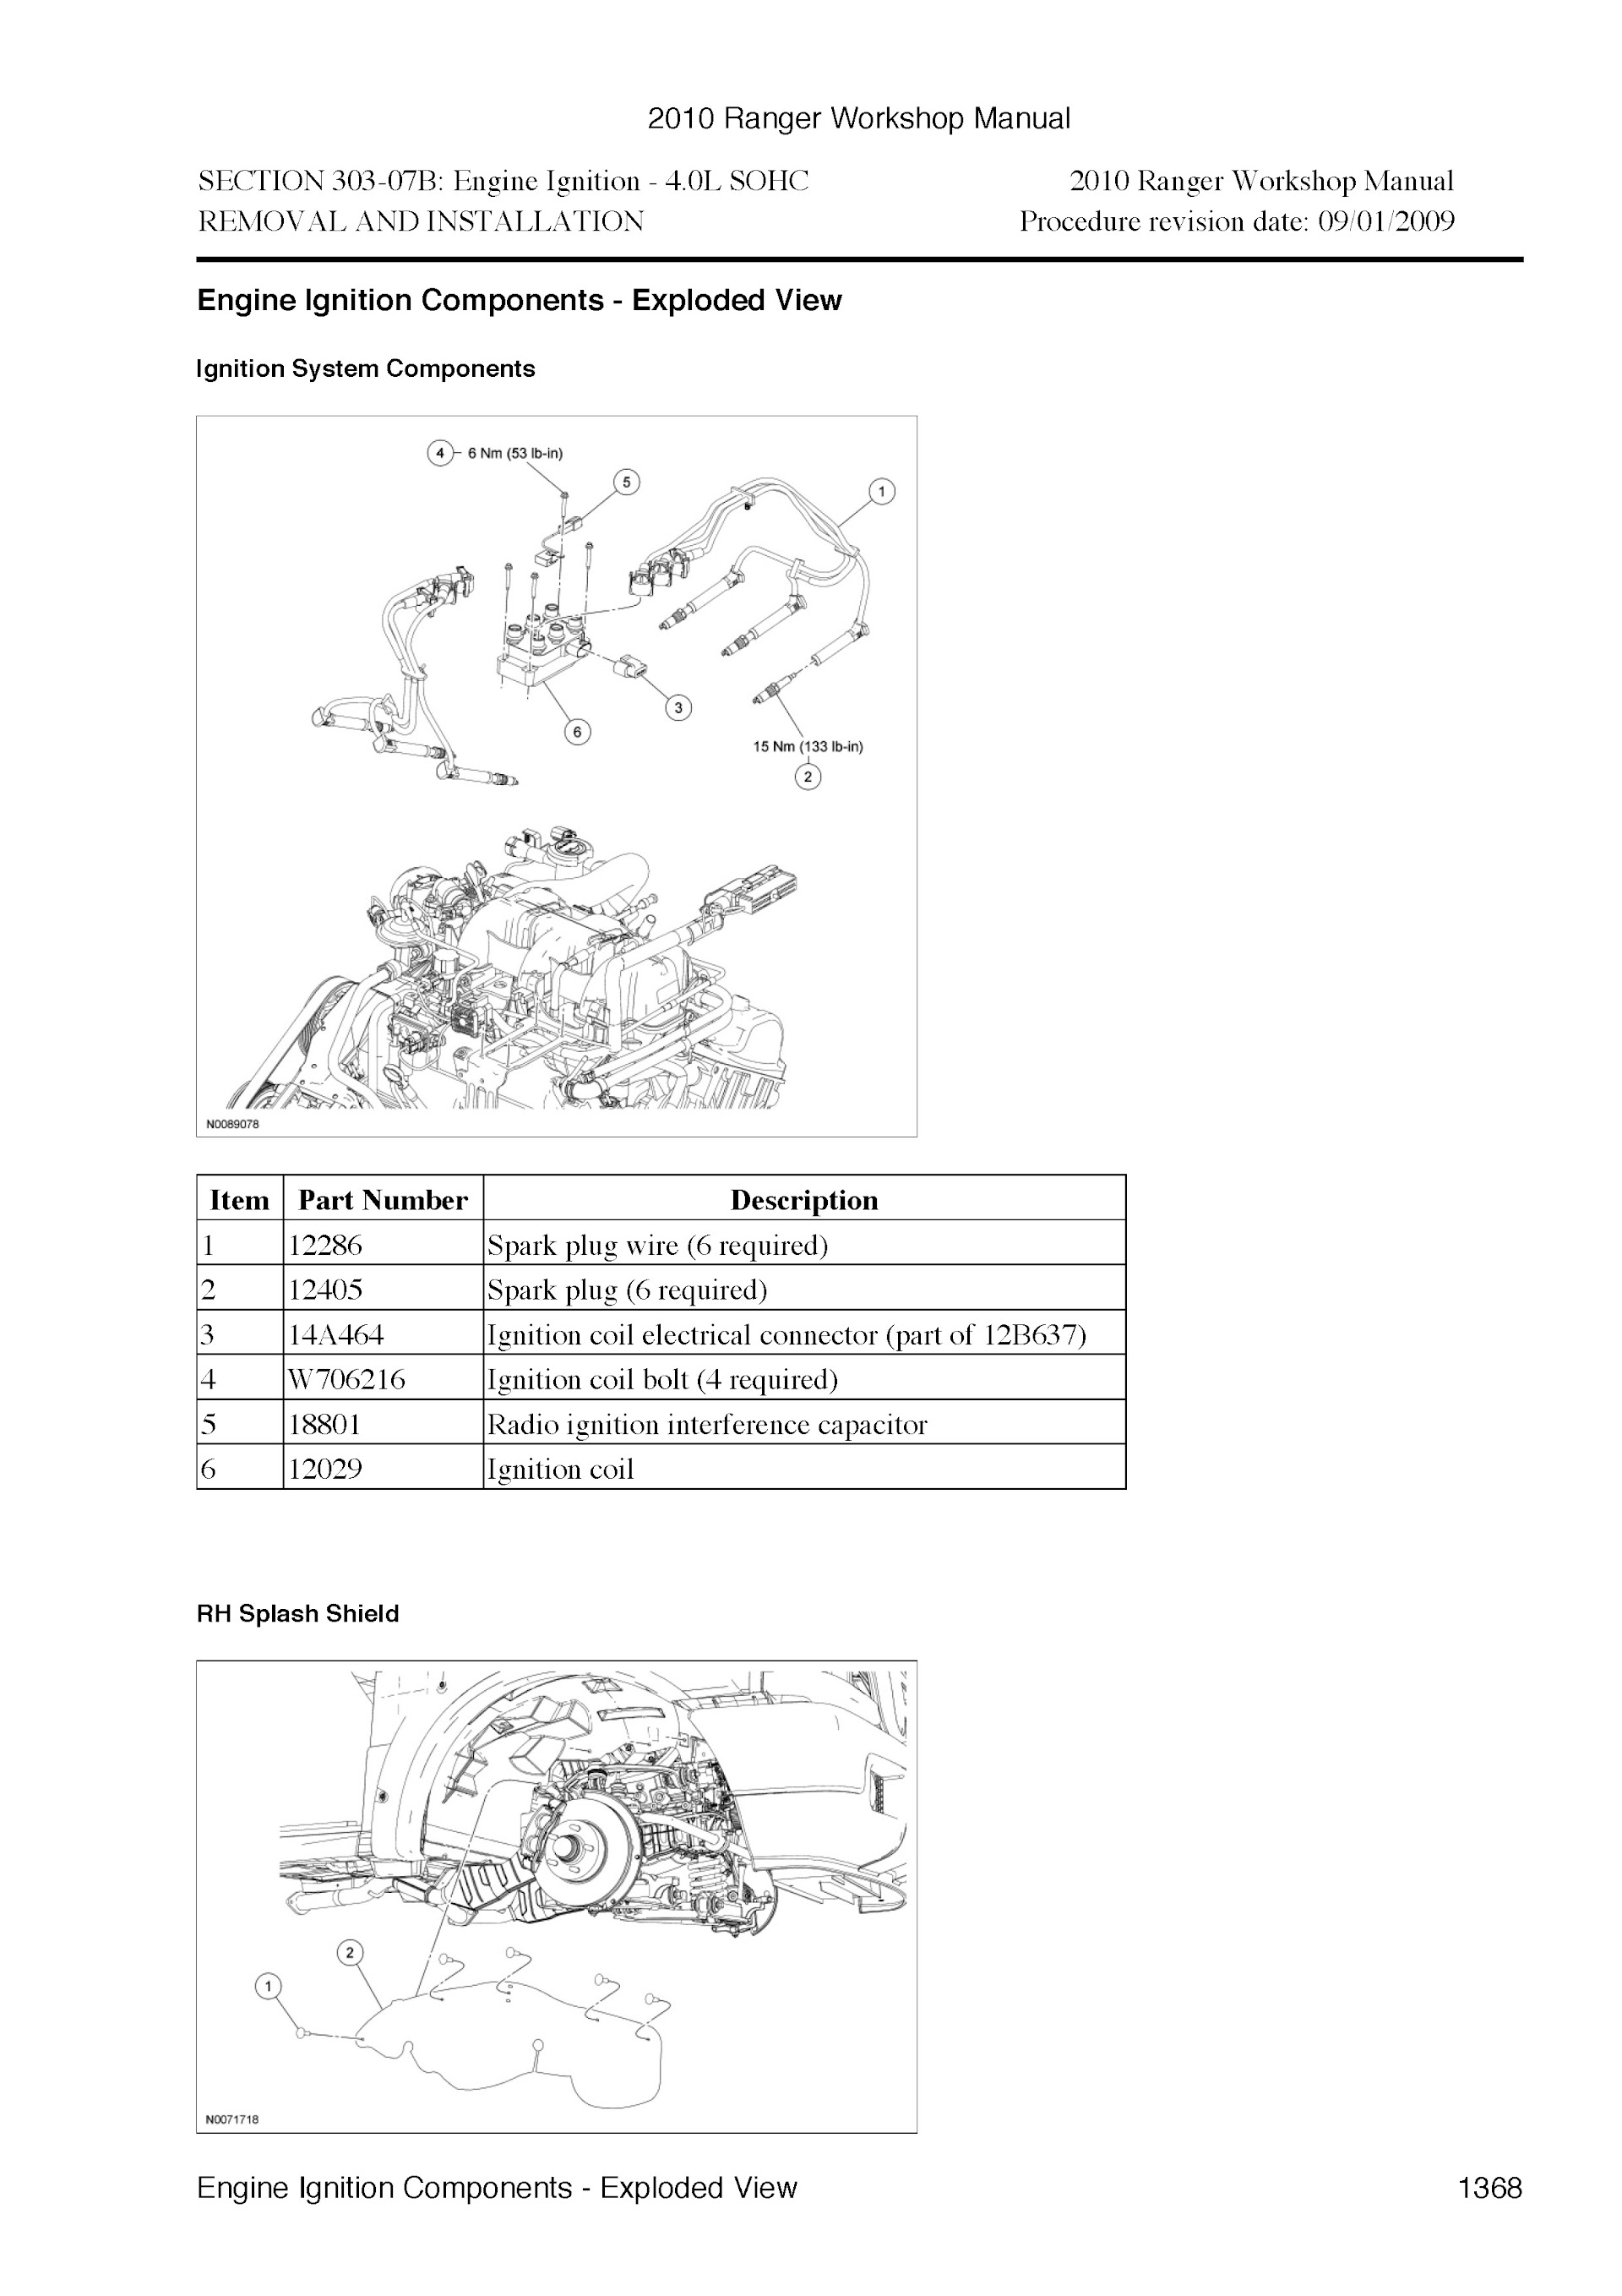 2010 Ford Ranger Repair Manual, Engine Ignition